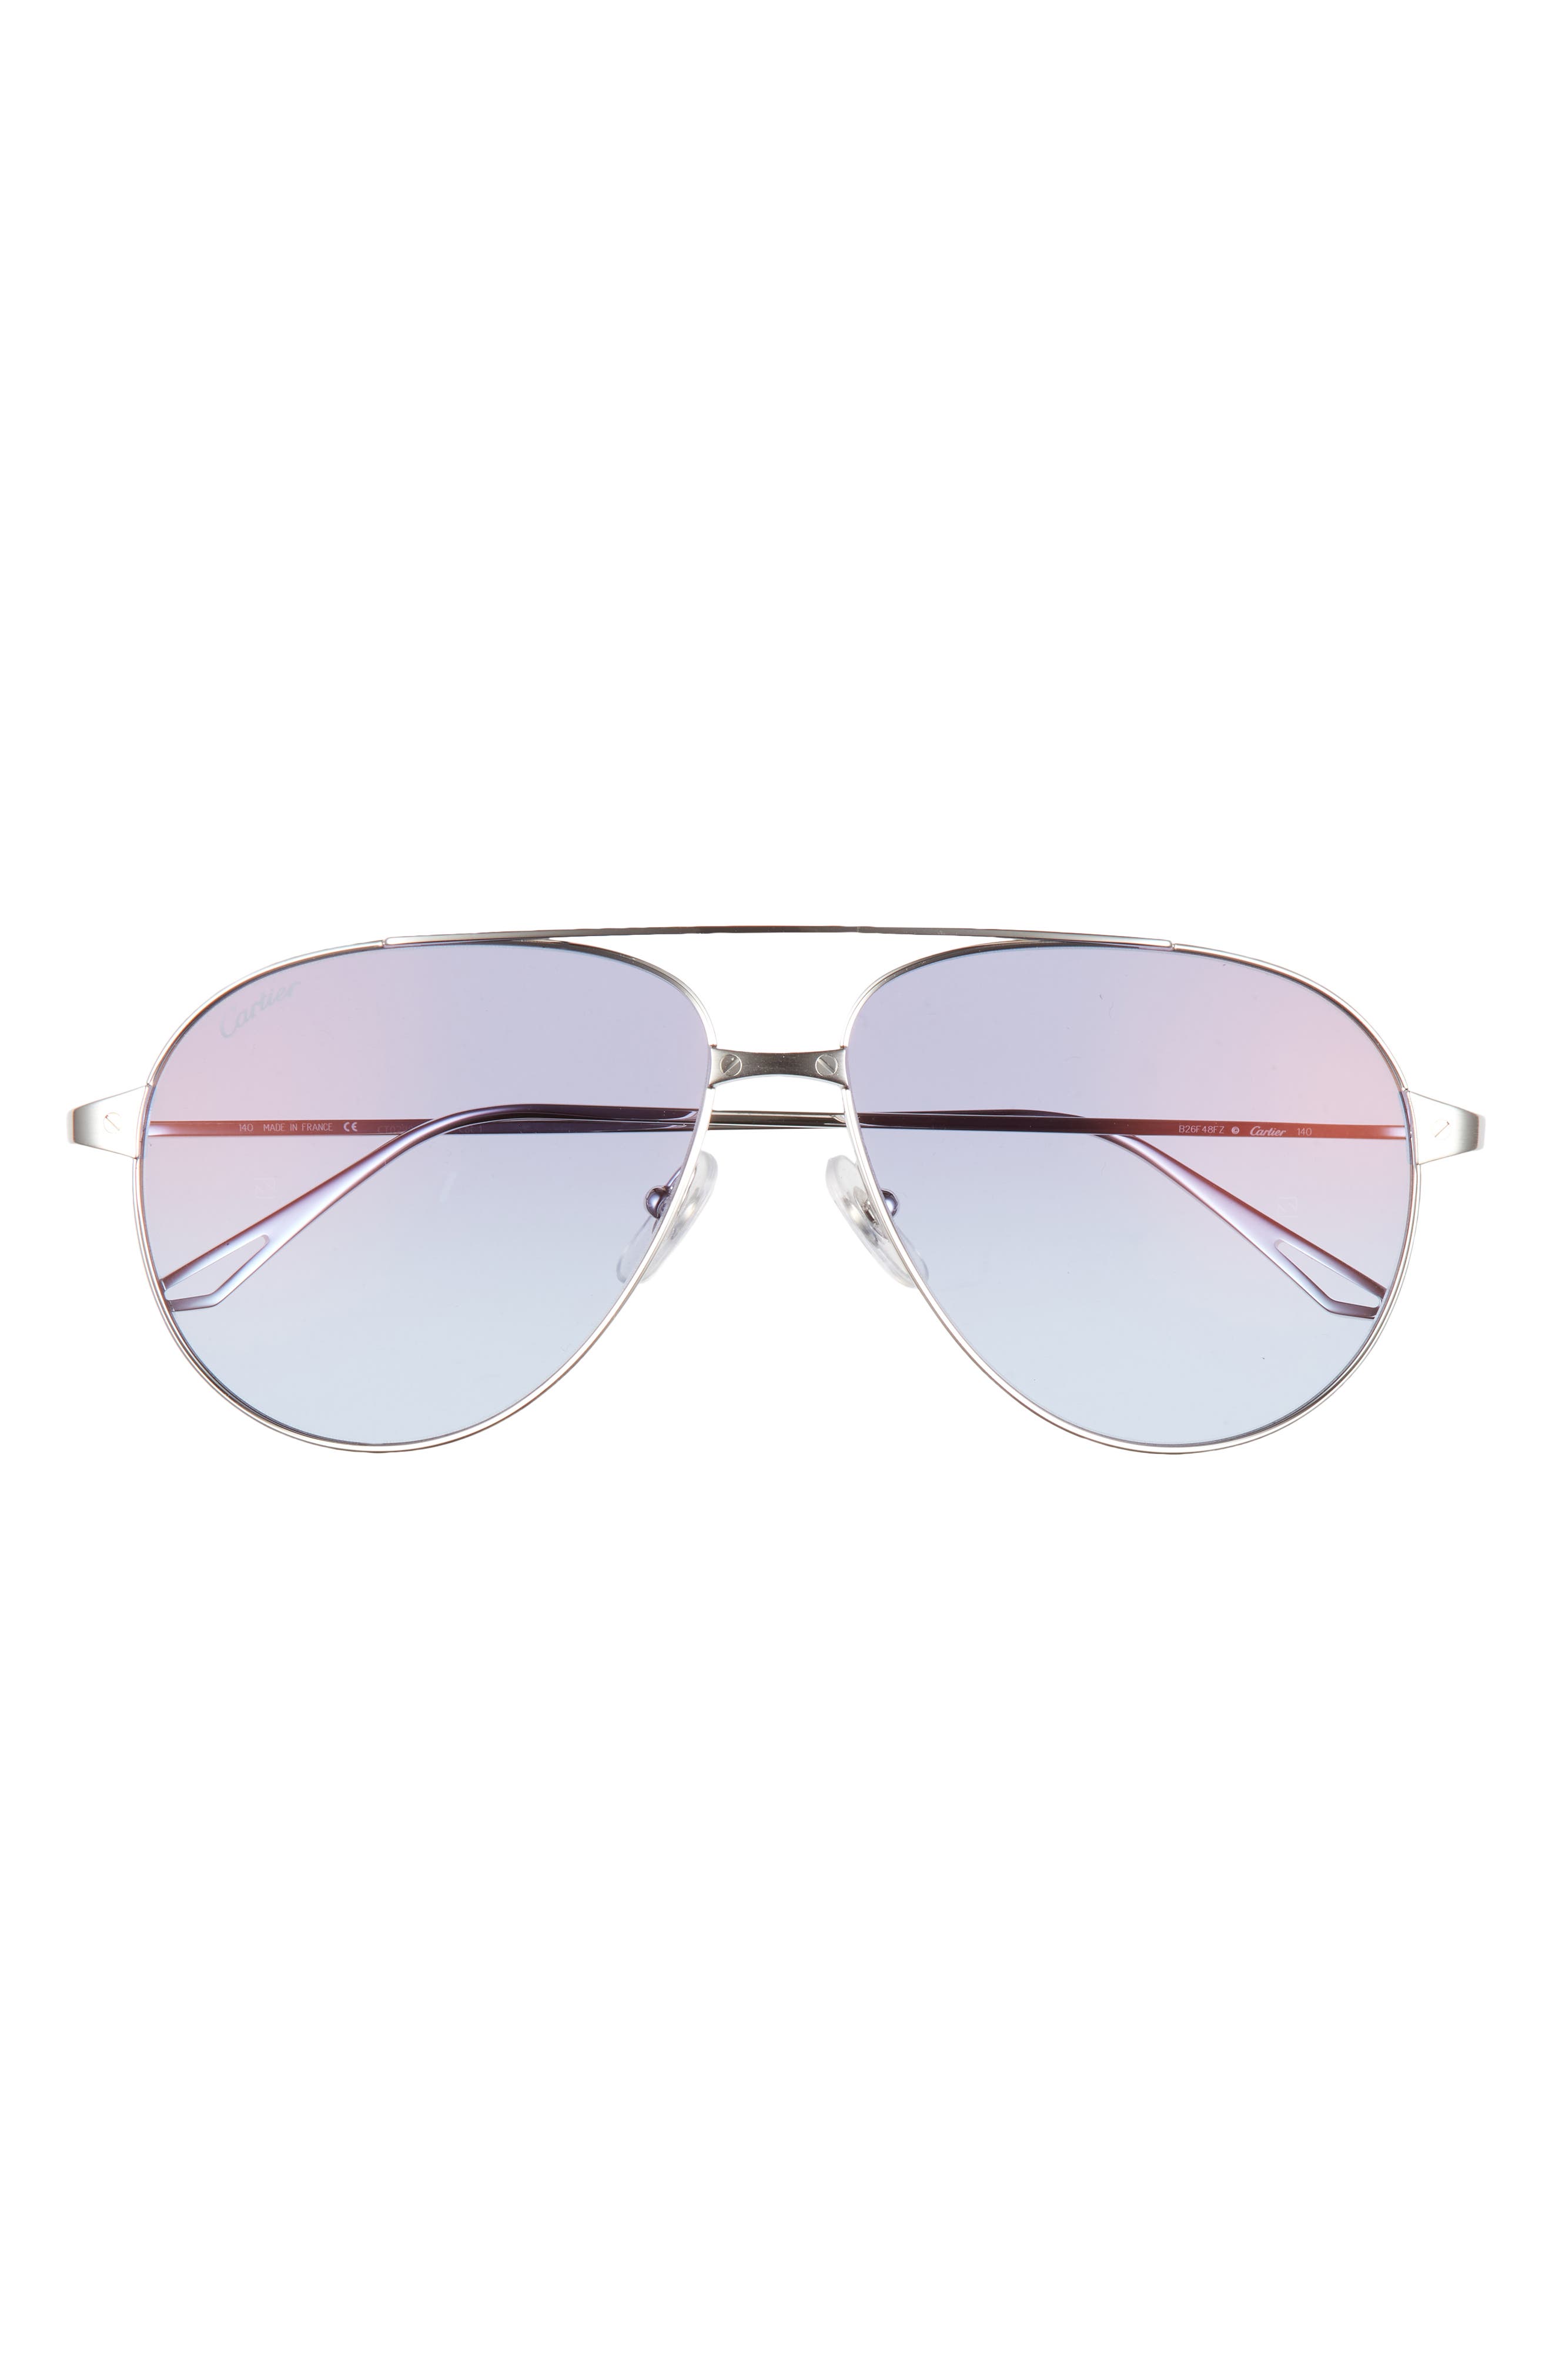 Cartier 59mm Aviator Sunglasses in Silver/Blue at Nordstrom